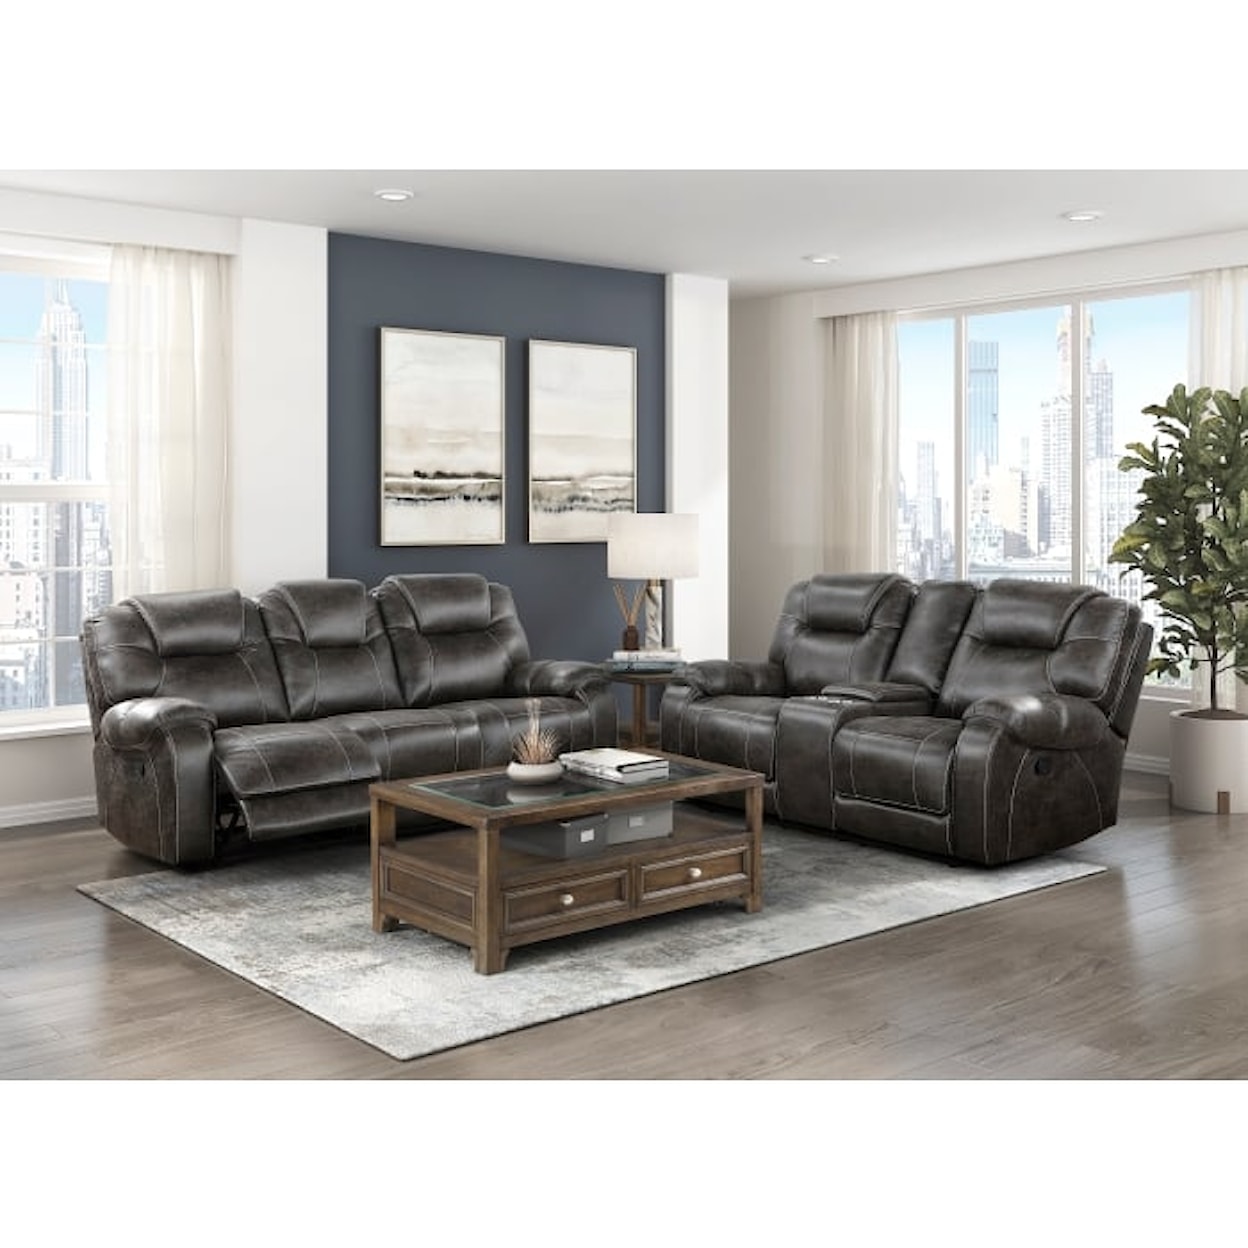 Homelegance Gainesville Reclining Console Loveseat